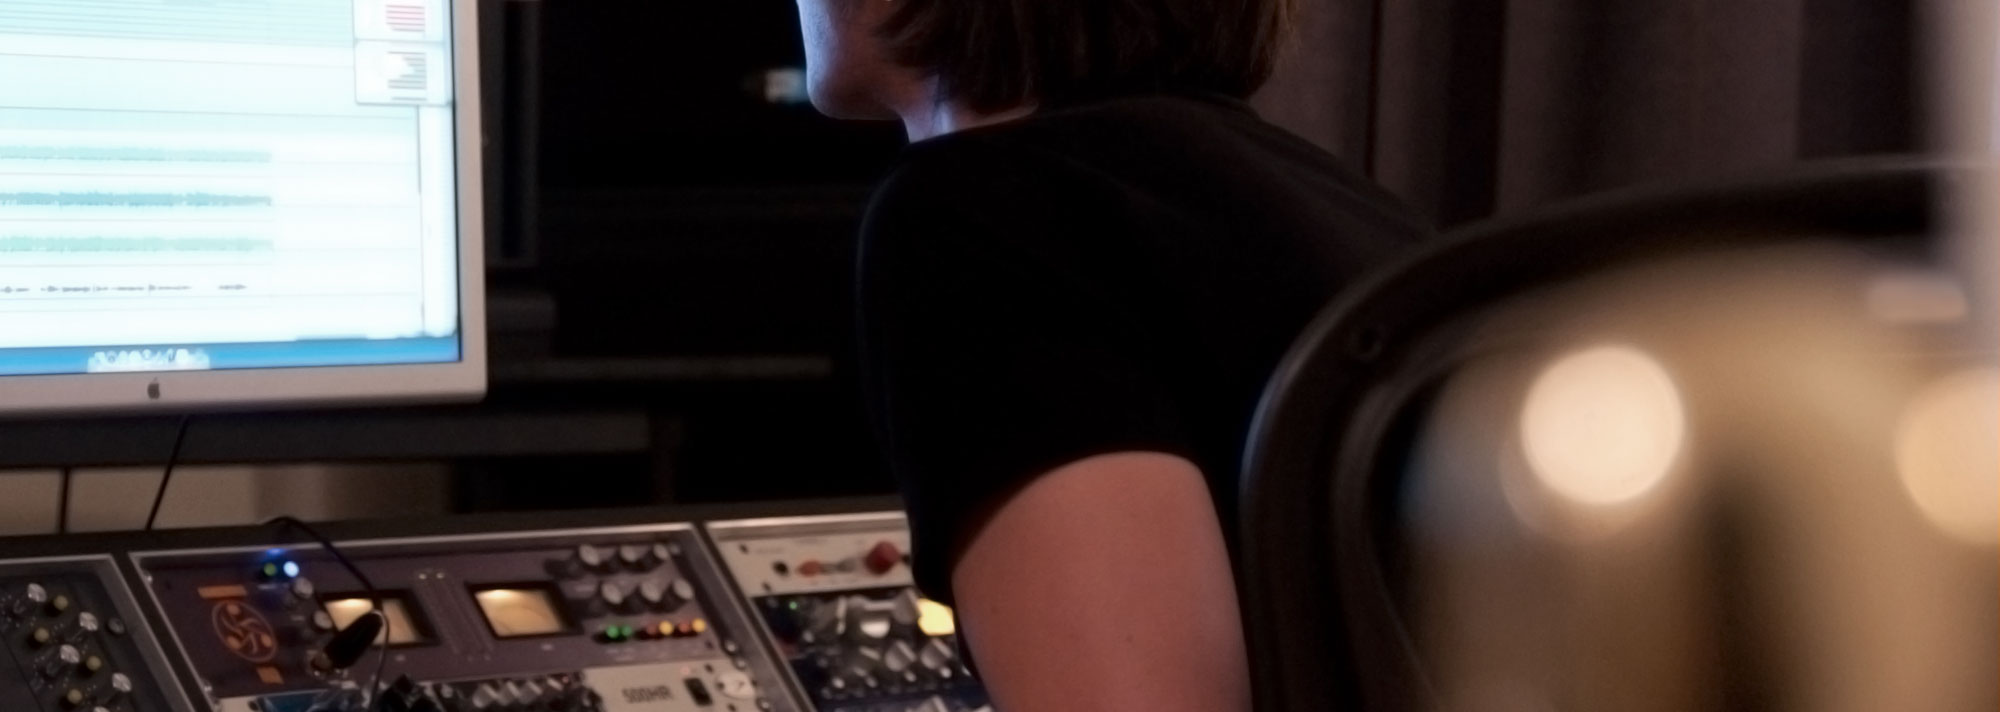 AudioLot President and Chief Engineer Joshua Aaron mixing an album at the studio desk